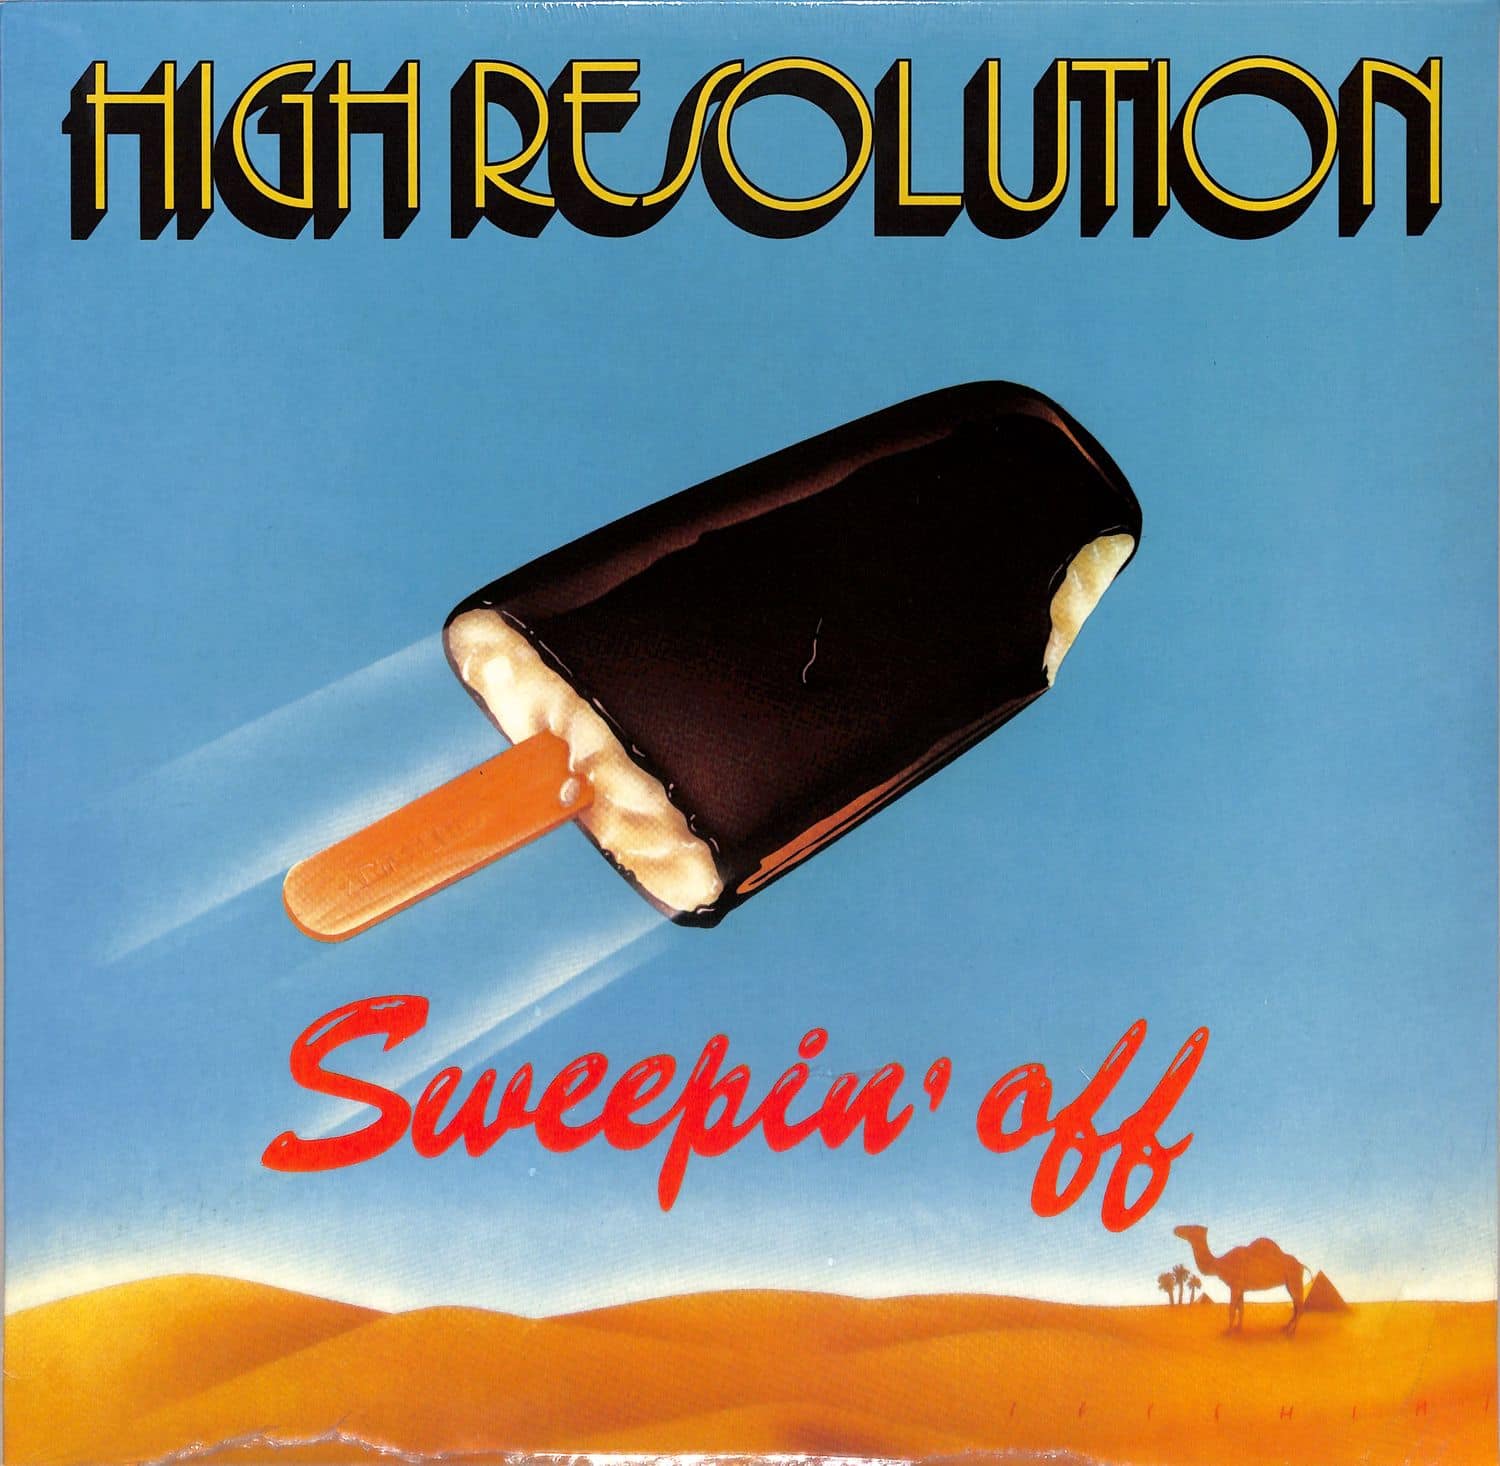 High Resolution - SWEEPIN OFF